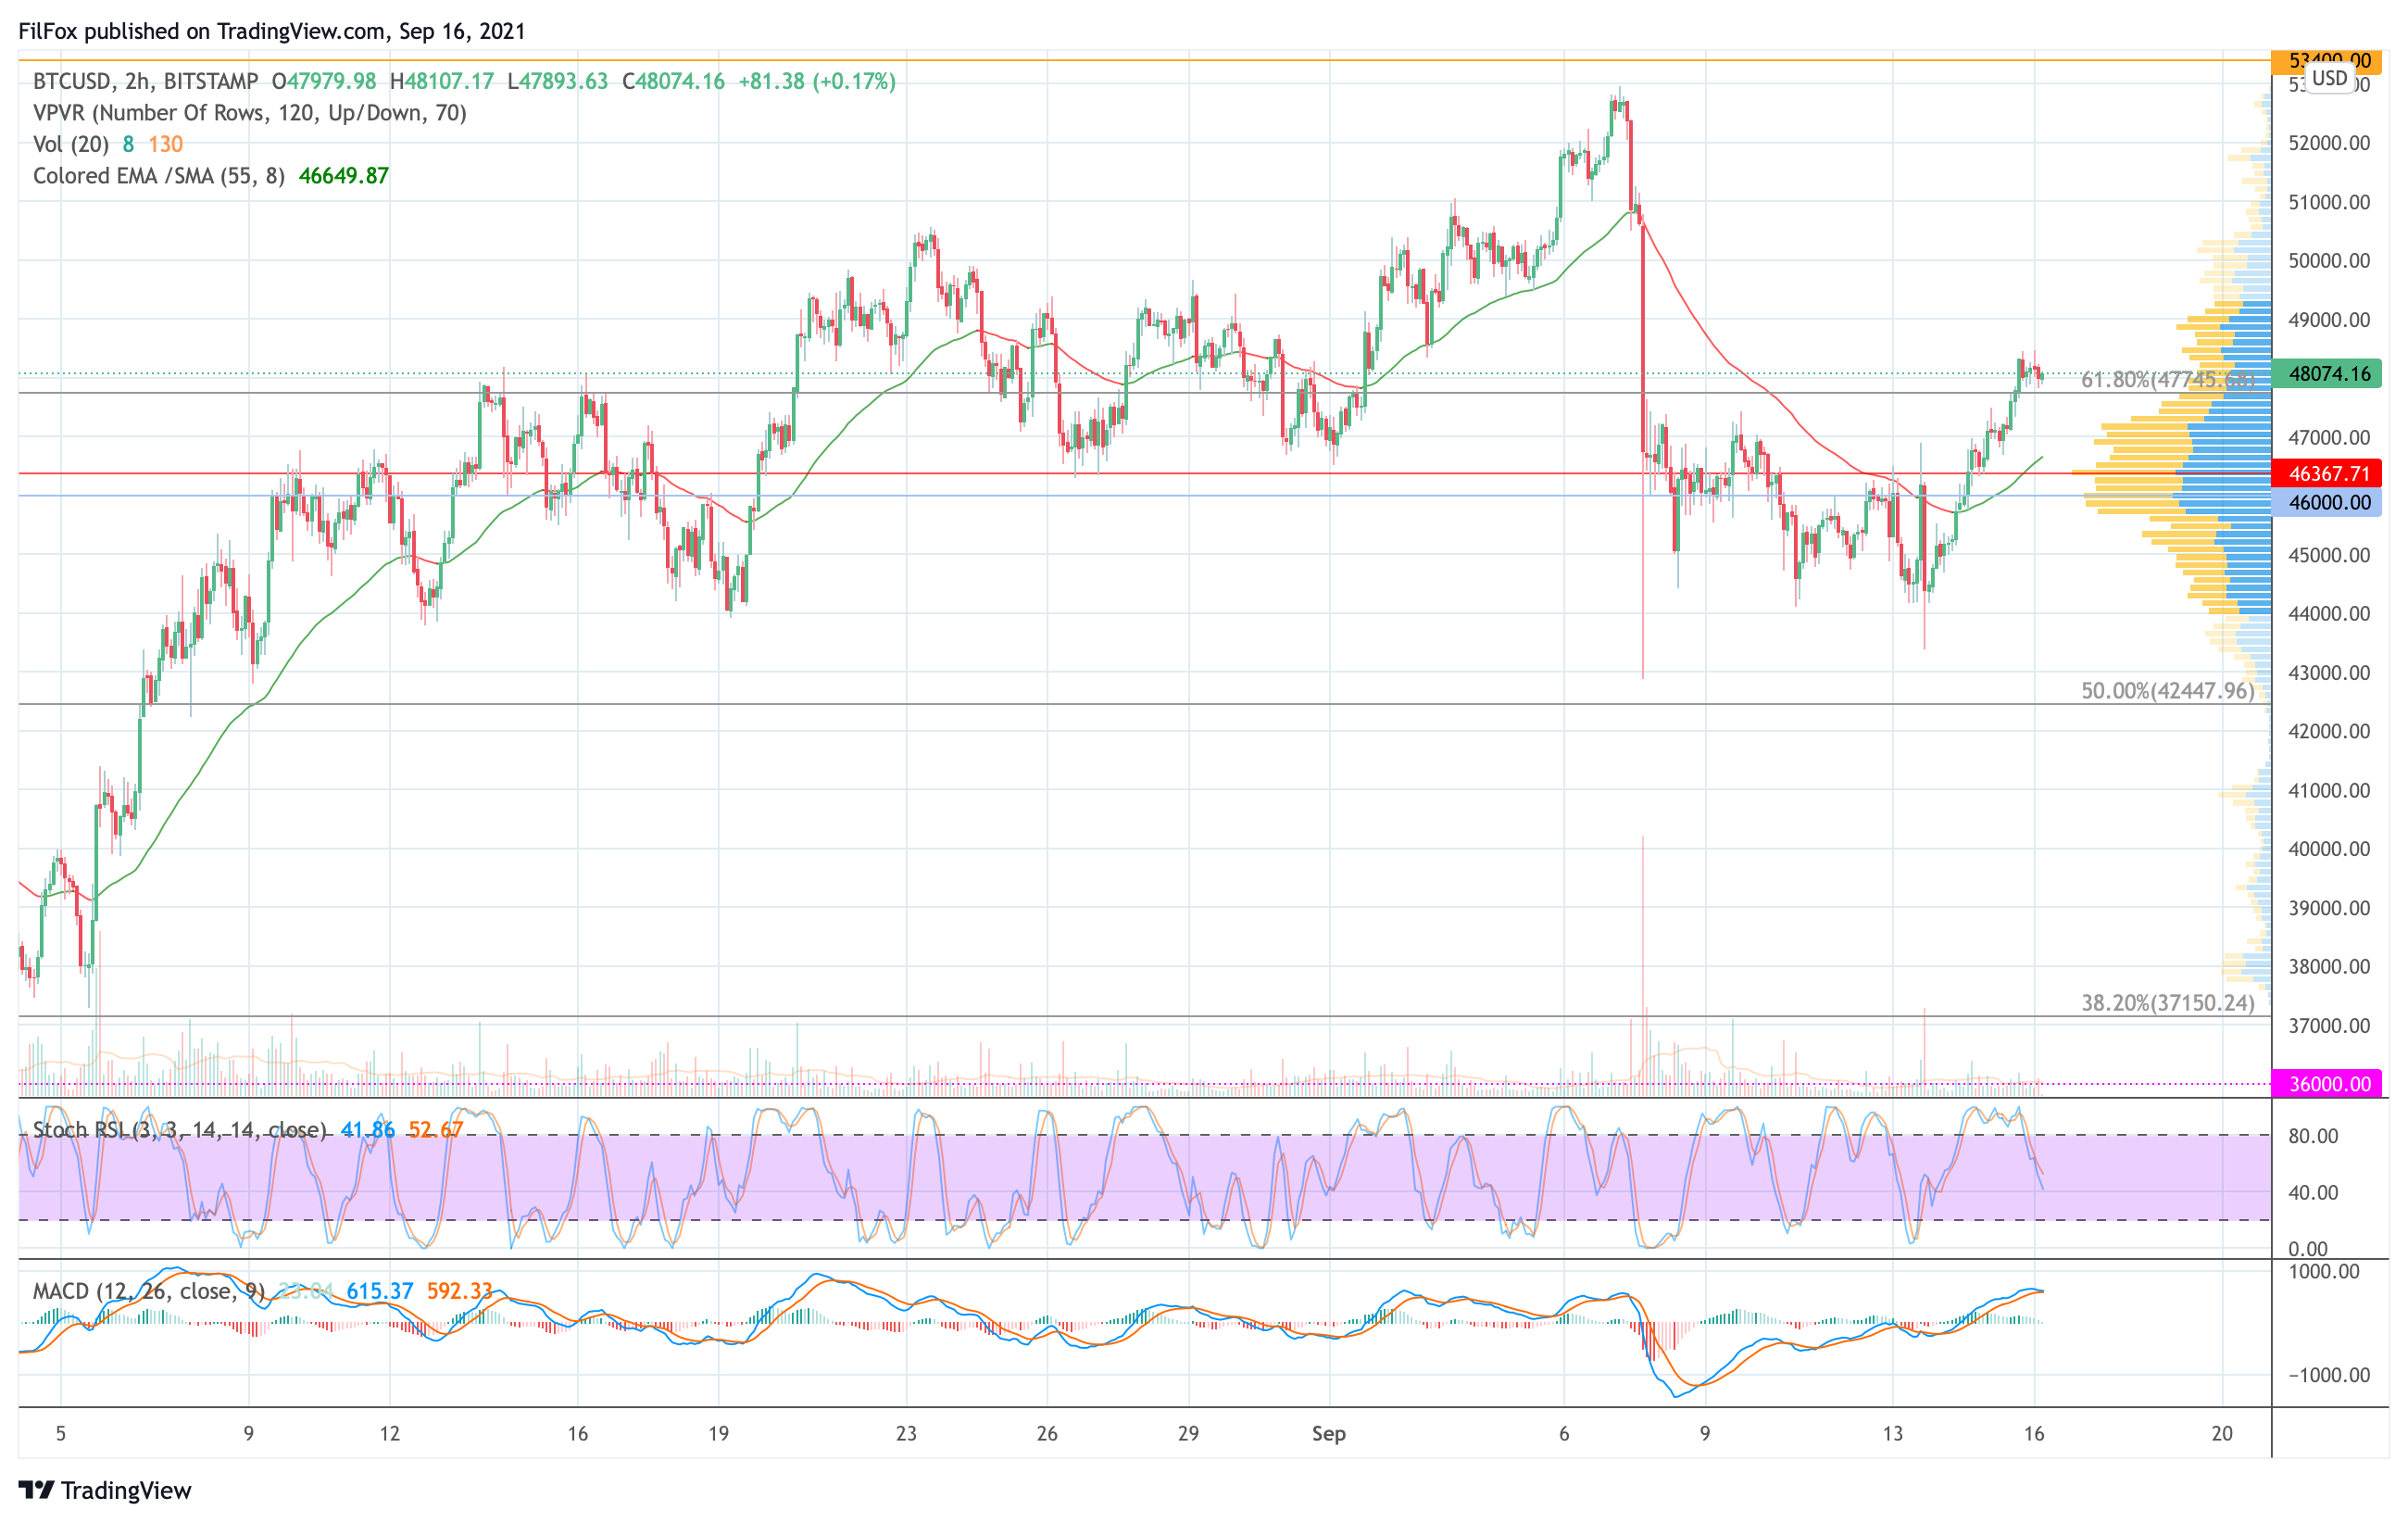 Analysis of the prices of Bitcoin, Ethereum, XRP for 09/16/2021